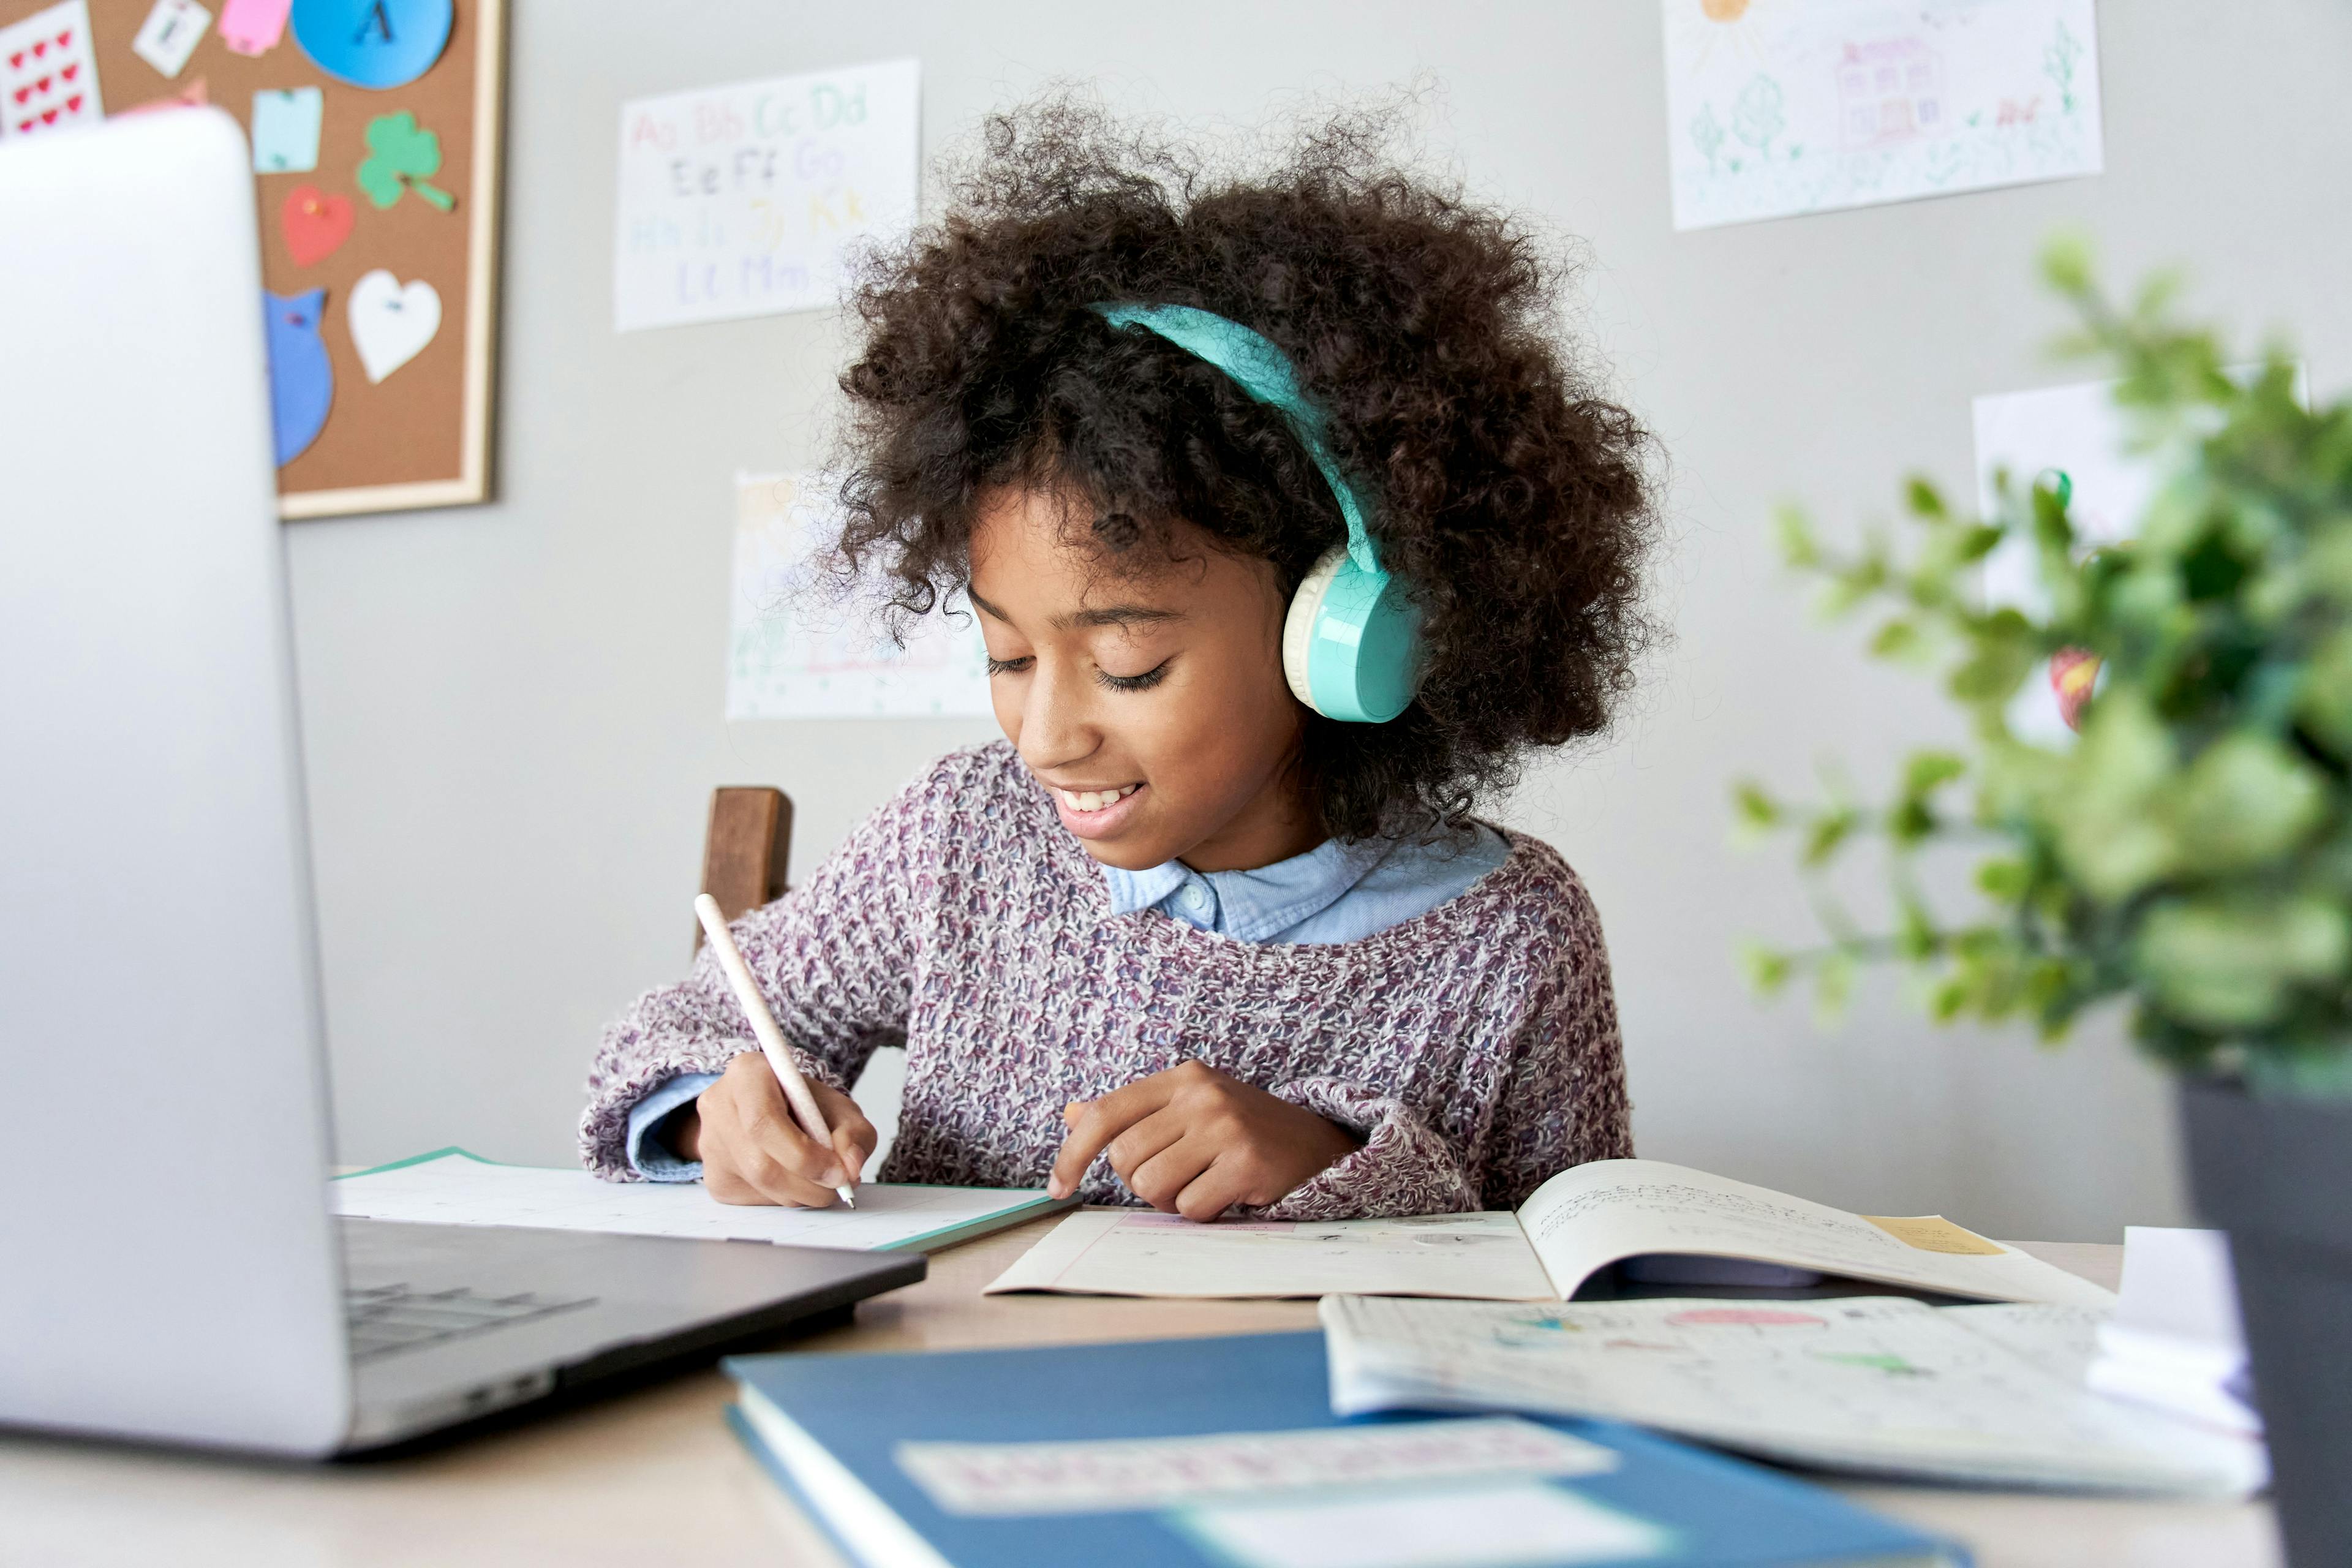 Poll: How parents feel about noise exposure from their child's headphones | Image Credit: © insta_photos - © insta_photos - stock.adobe.com.